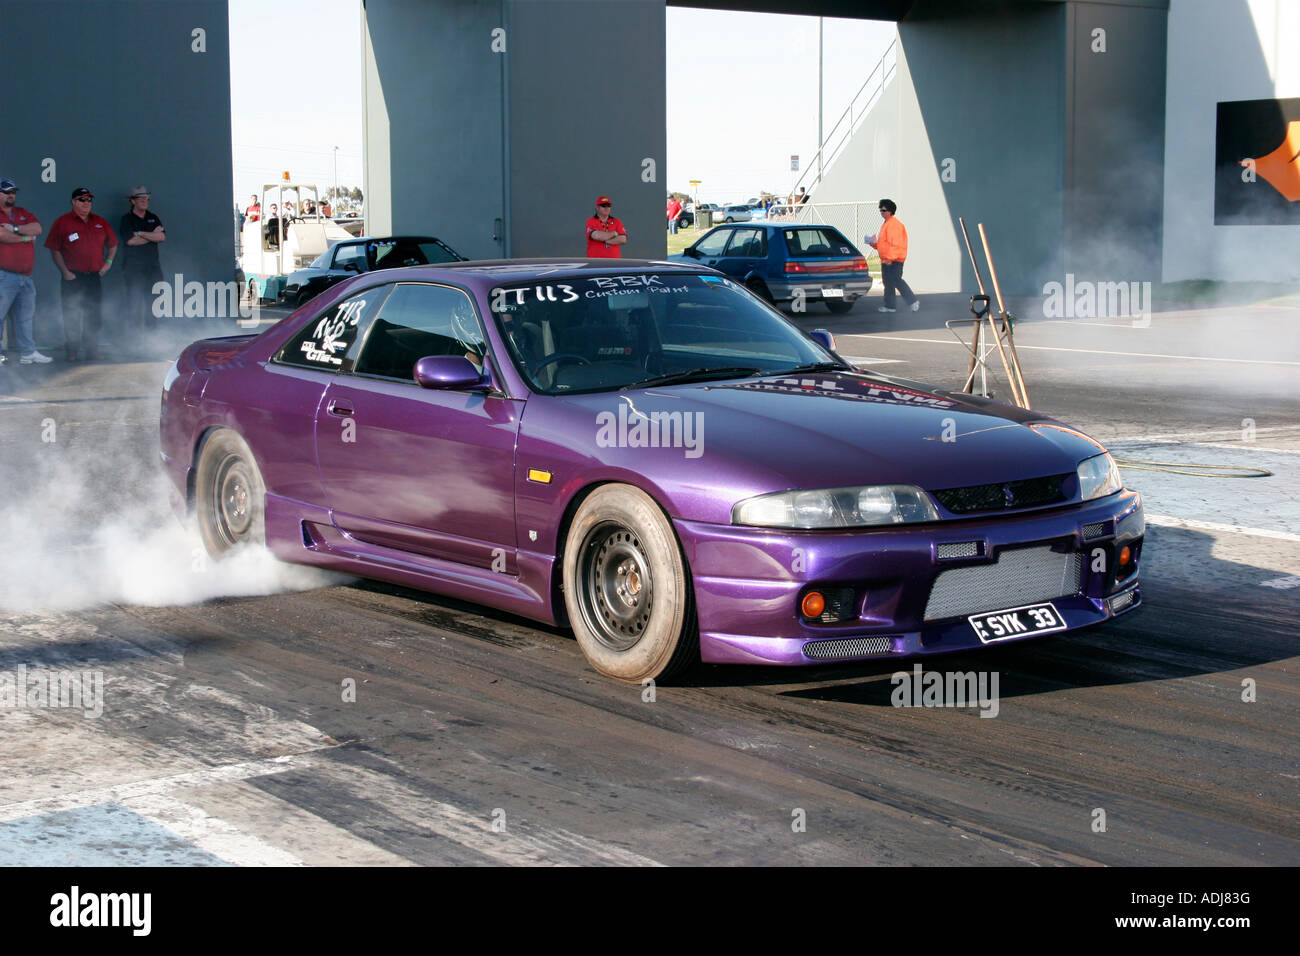 Modified Japanese R33 Nissan Skyline car performing a tyre warming burnout  prior to a quarter mile drag race Stock Photo - Alamy